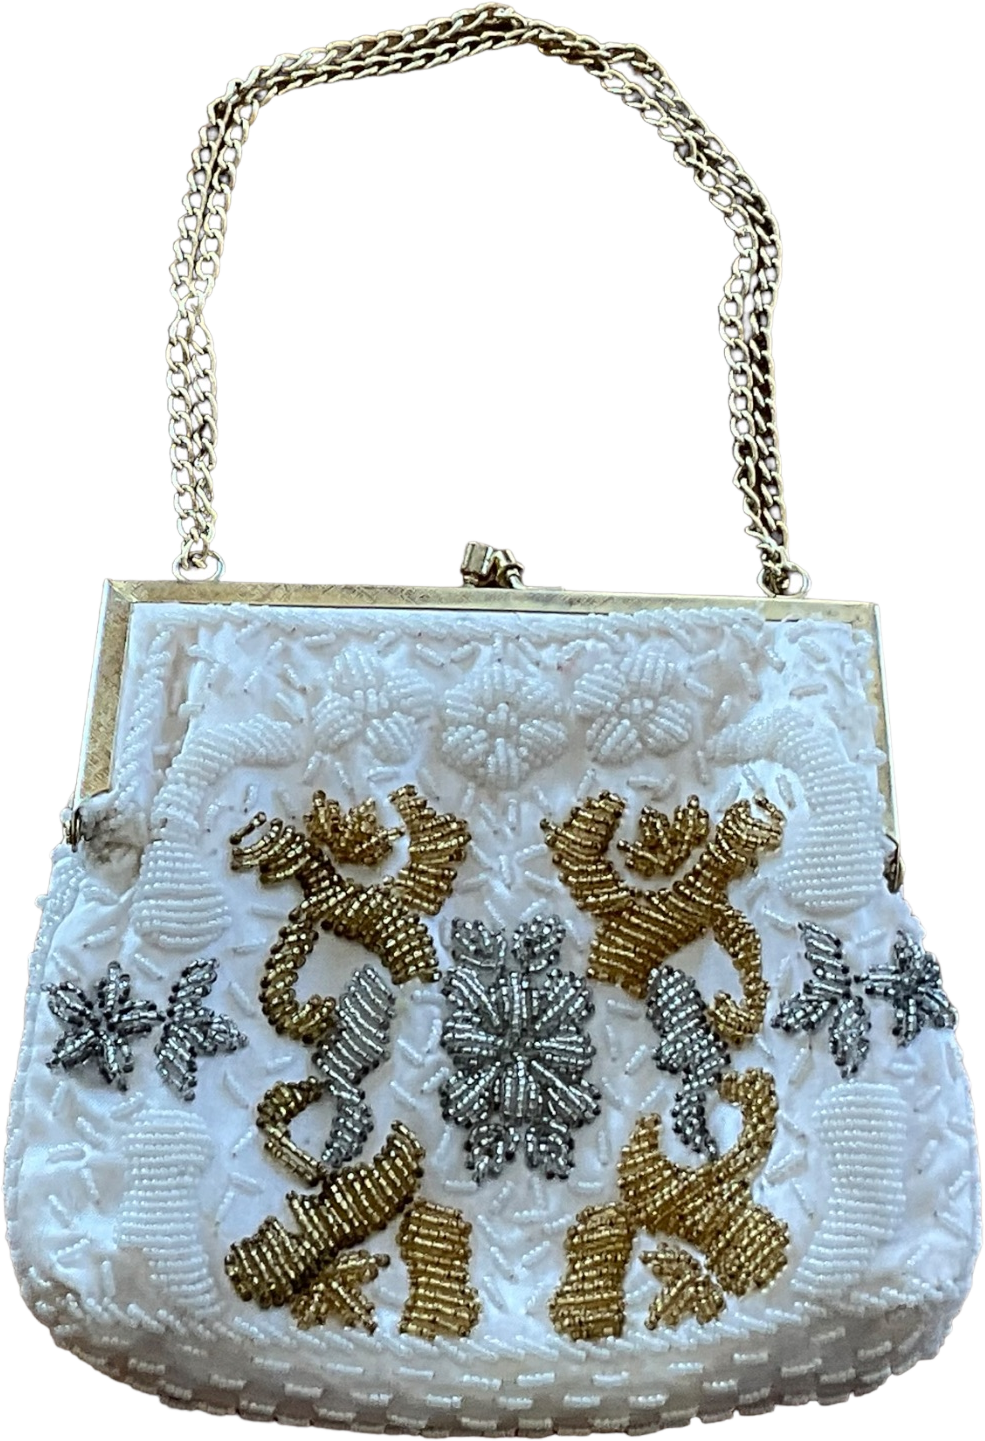 Vintage 70's/80's White Beaded Purse with Gold Chain by La Regale